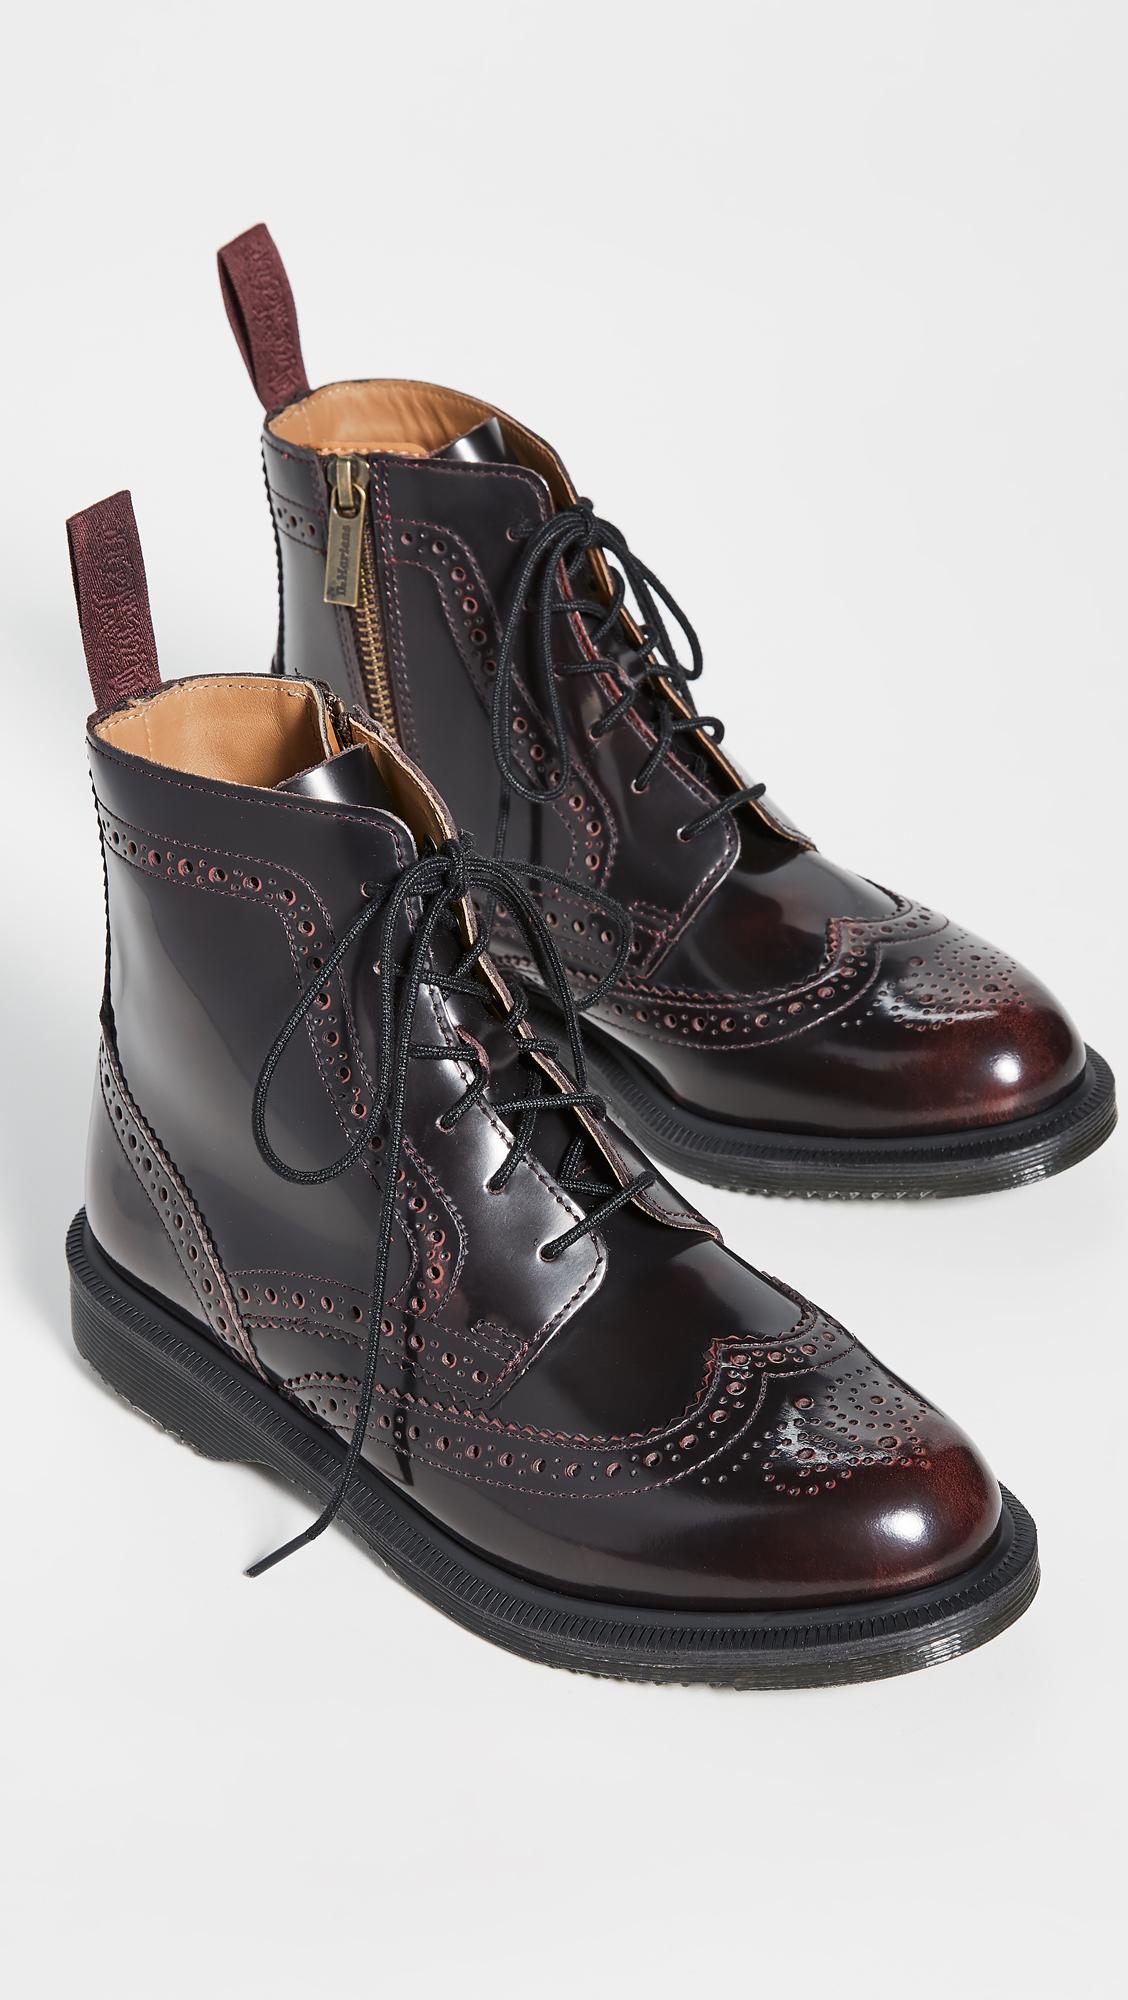 Dr. Martens Leather Delphine 6 Eye Brogue Boots in Cherry Red (Black) - Lyst